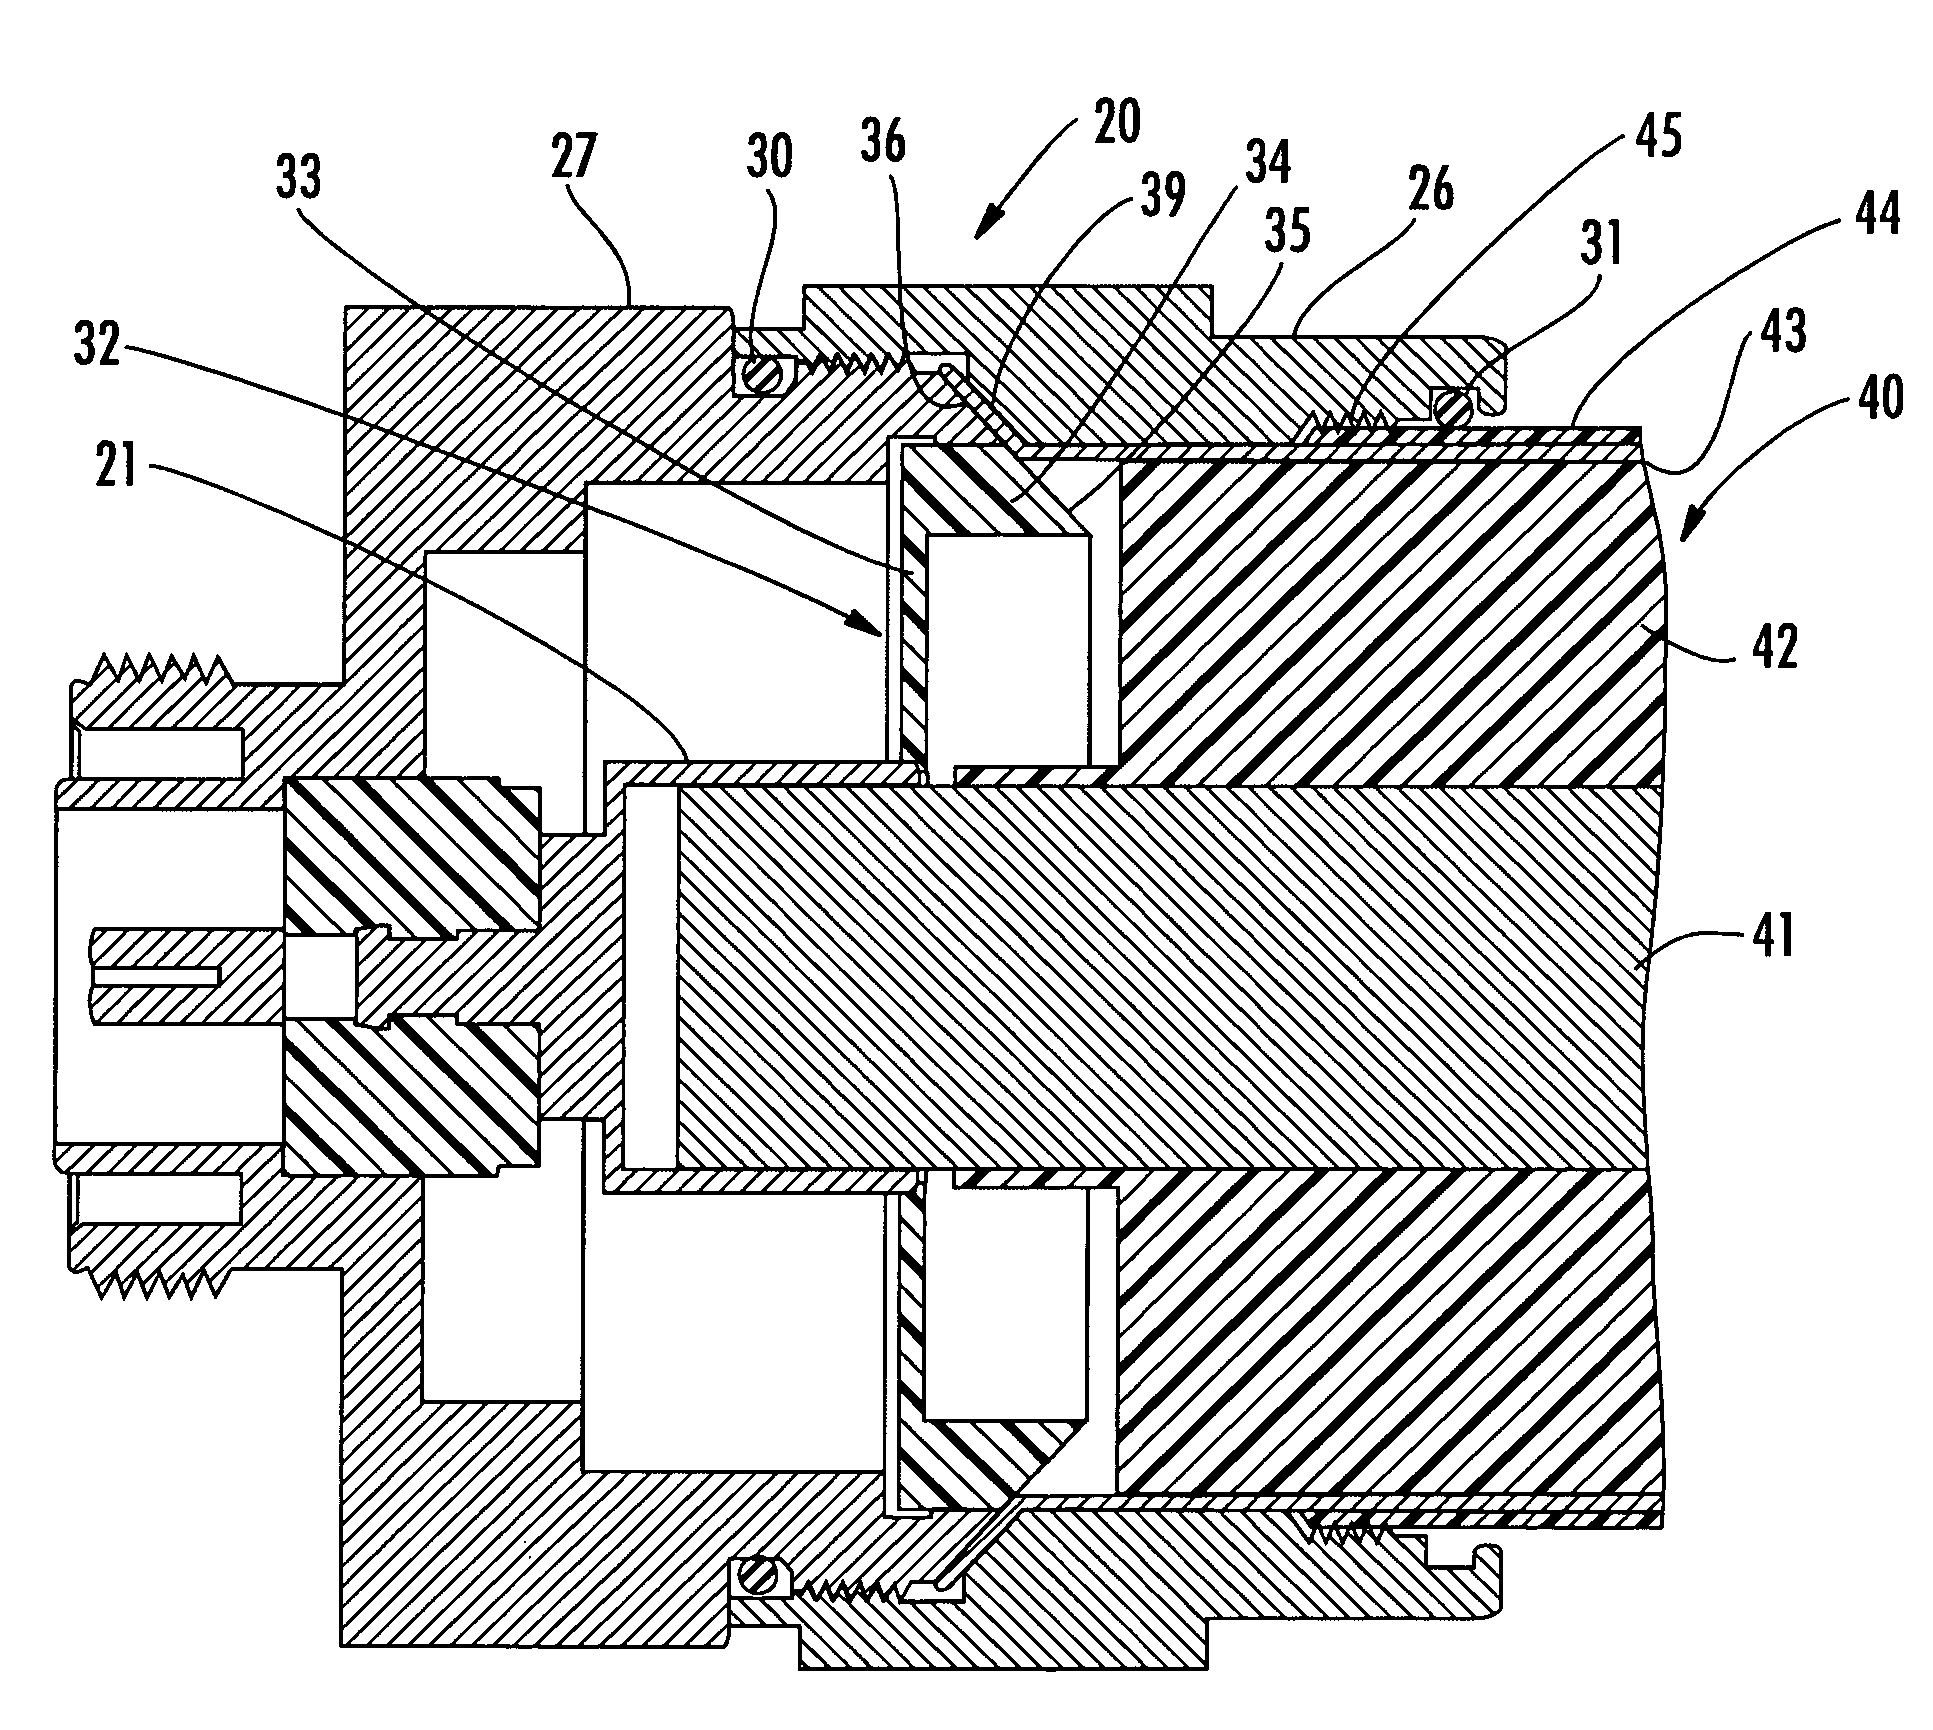 Coaxial connector including clamping ramps and associated method